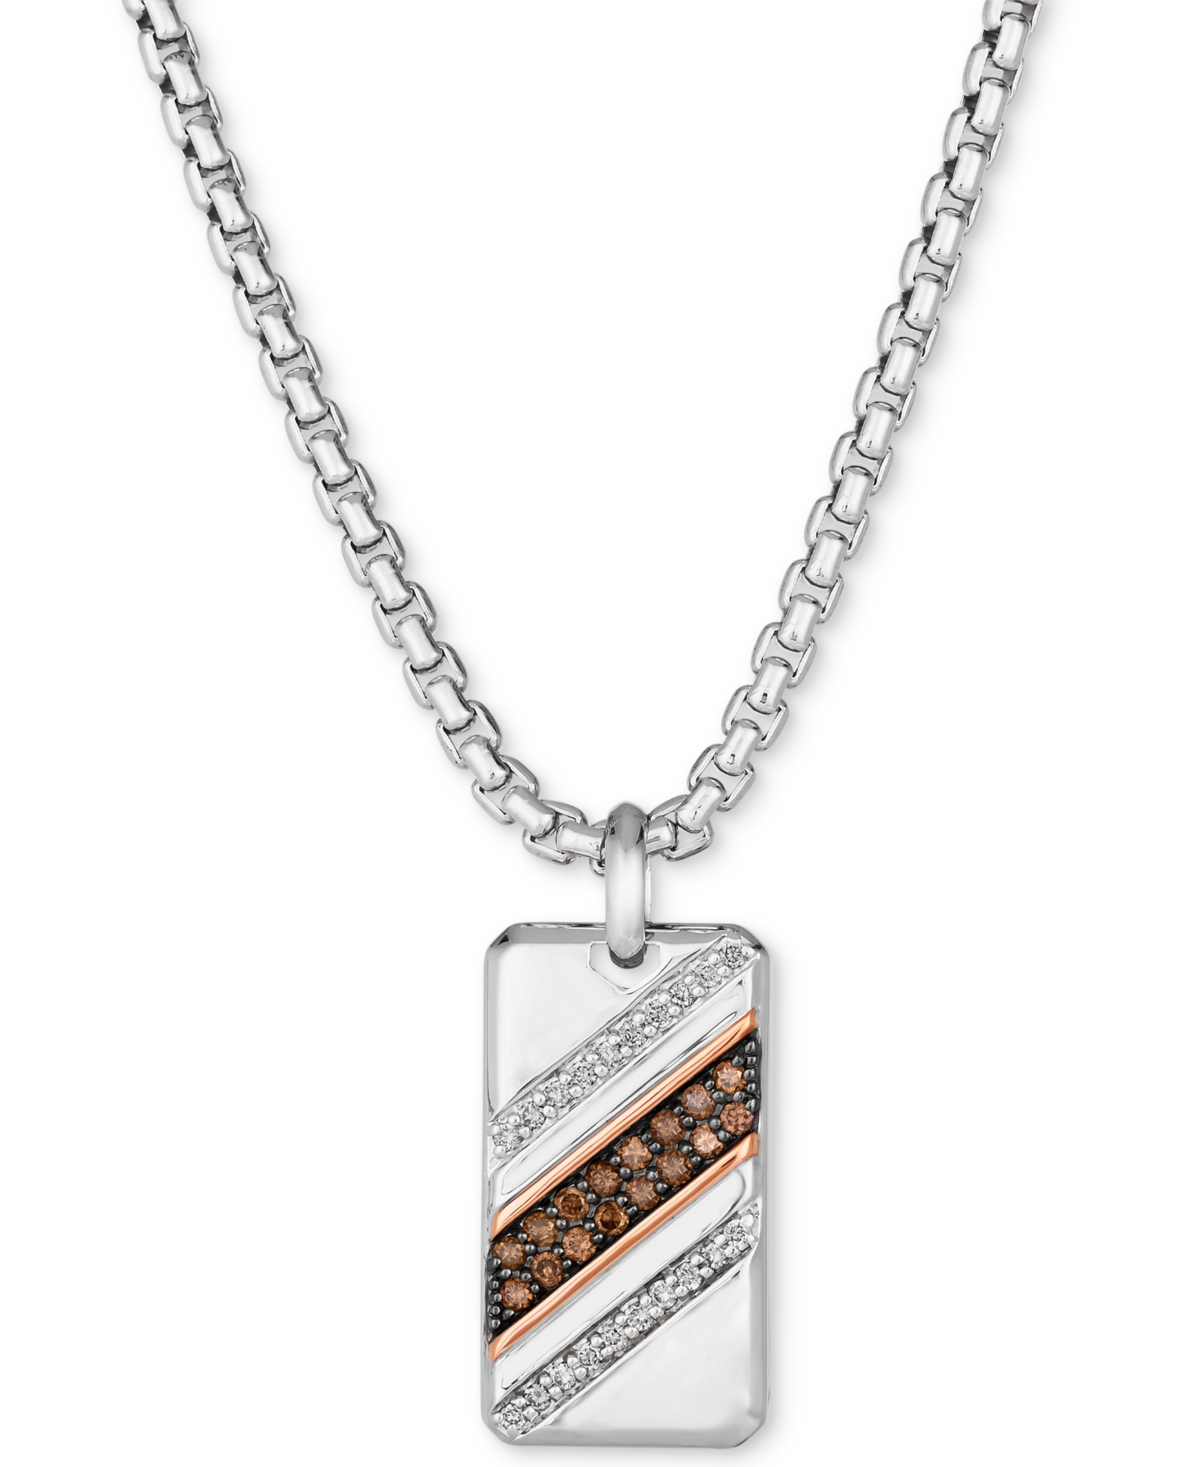 Men's Chocolate Diamond (1/4 ct. t.w.) & Nude Diamond (1/6 ct. t.w.) Dog Tag 22" Pendant Necklace in Sterling Silver & 14k Rose Gold-Plate - S